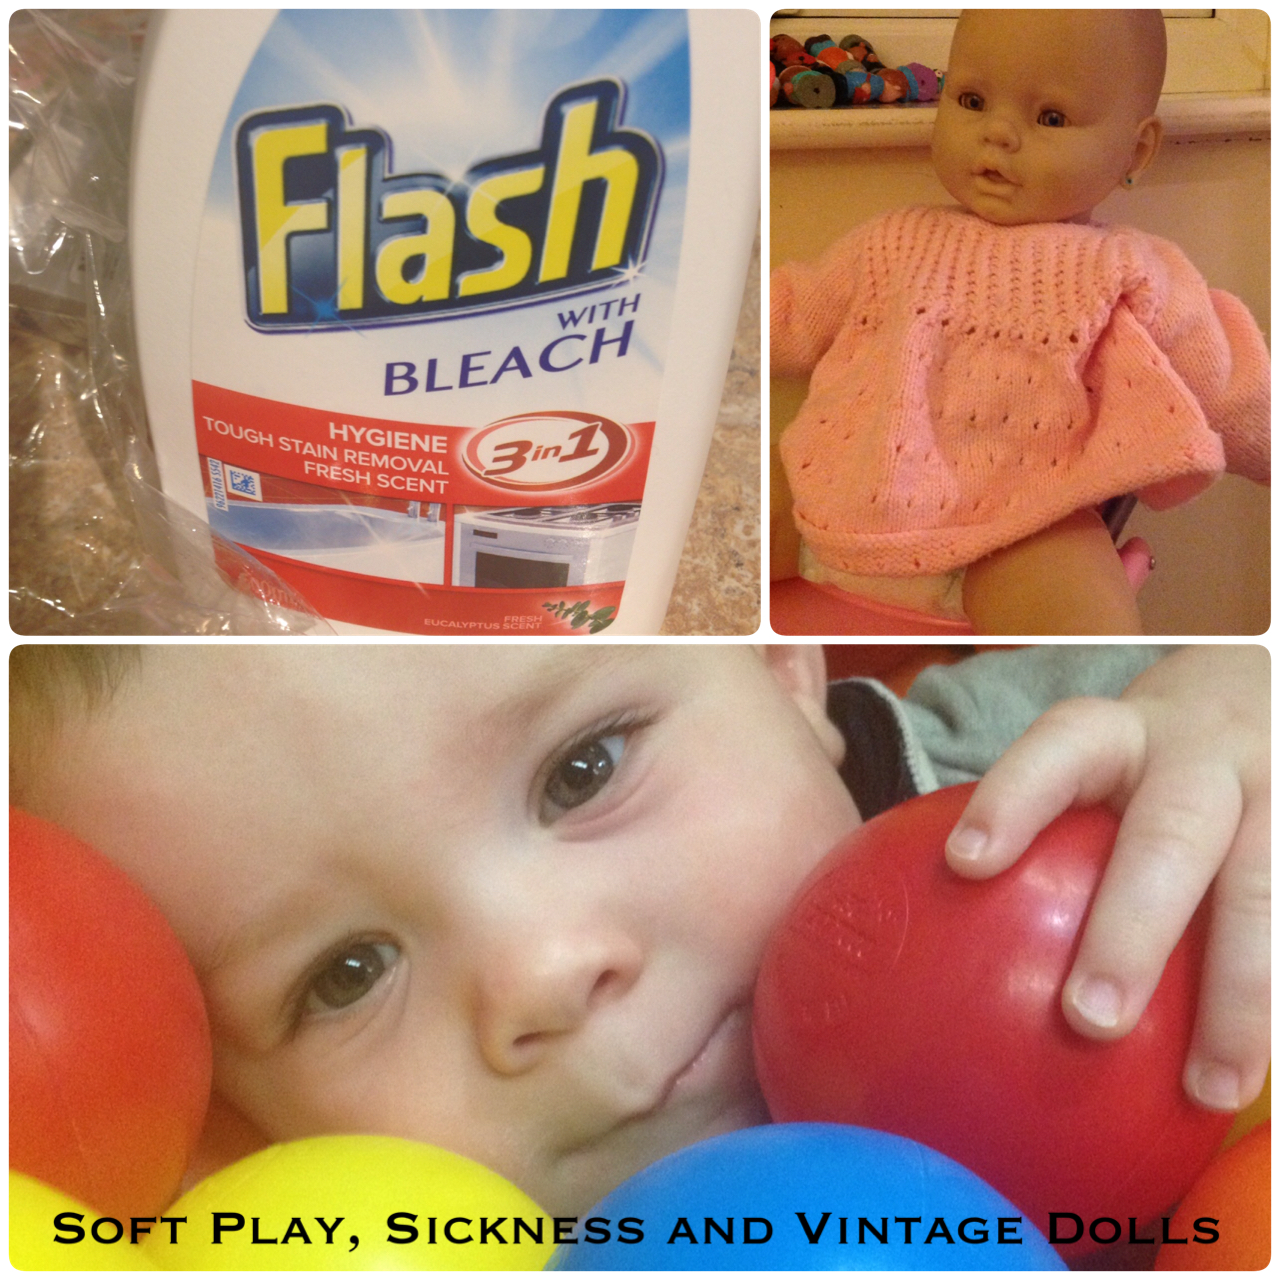 Soft Play, Sickness and Vintage Dolls